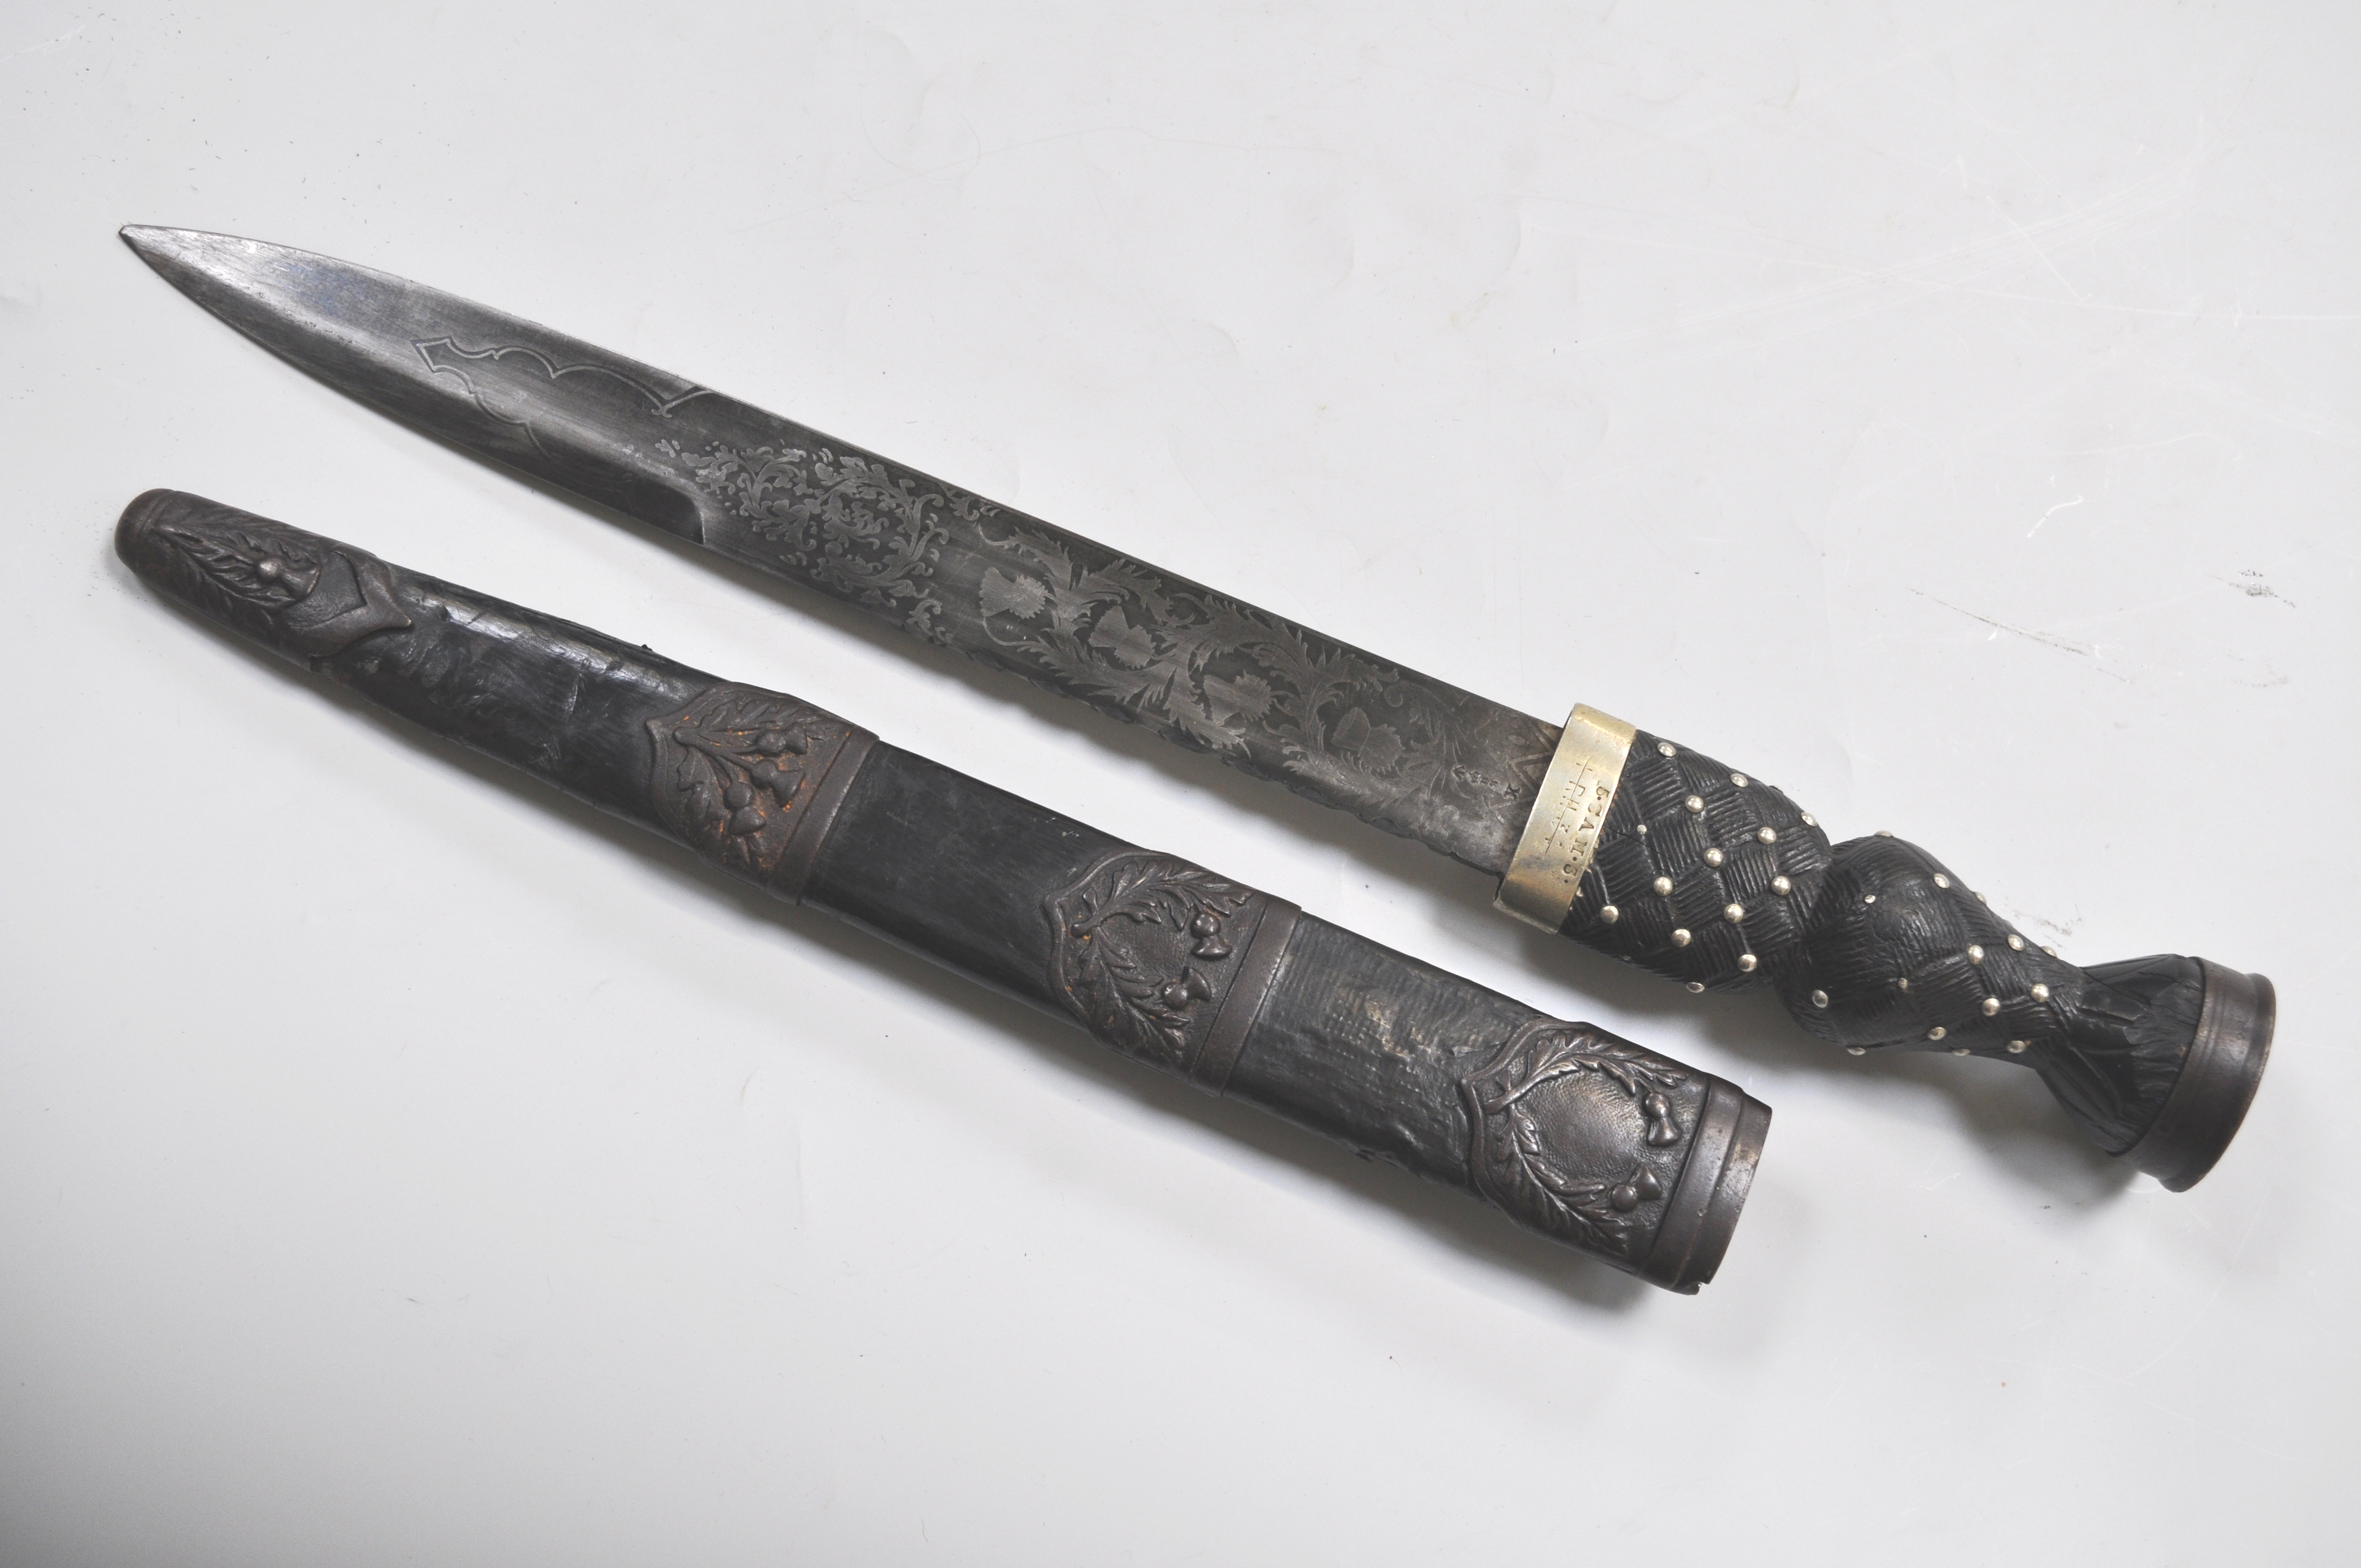 Scottish Military Dirk, the pommel with metal cap and Crown, leather bound studded grip, - Image 2 of 8